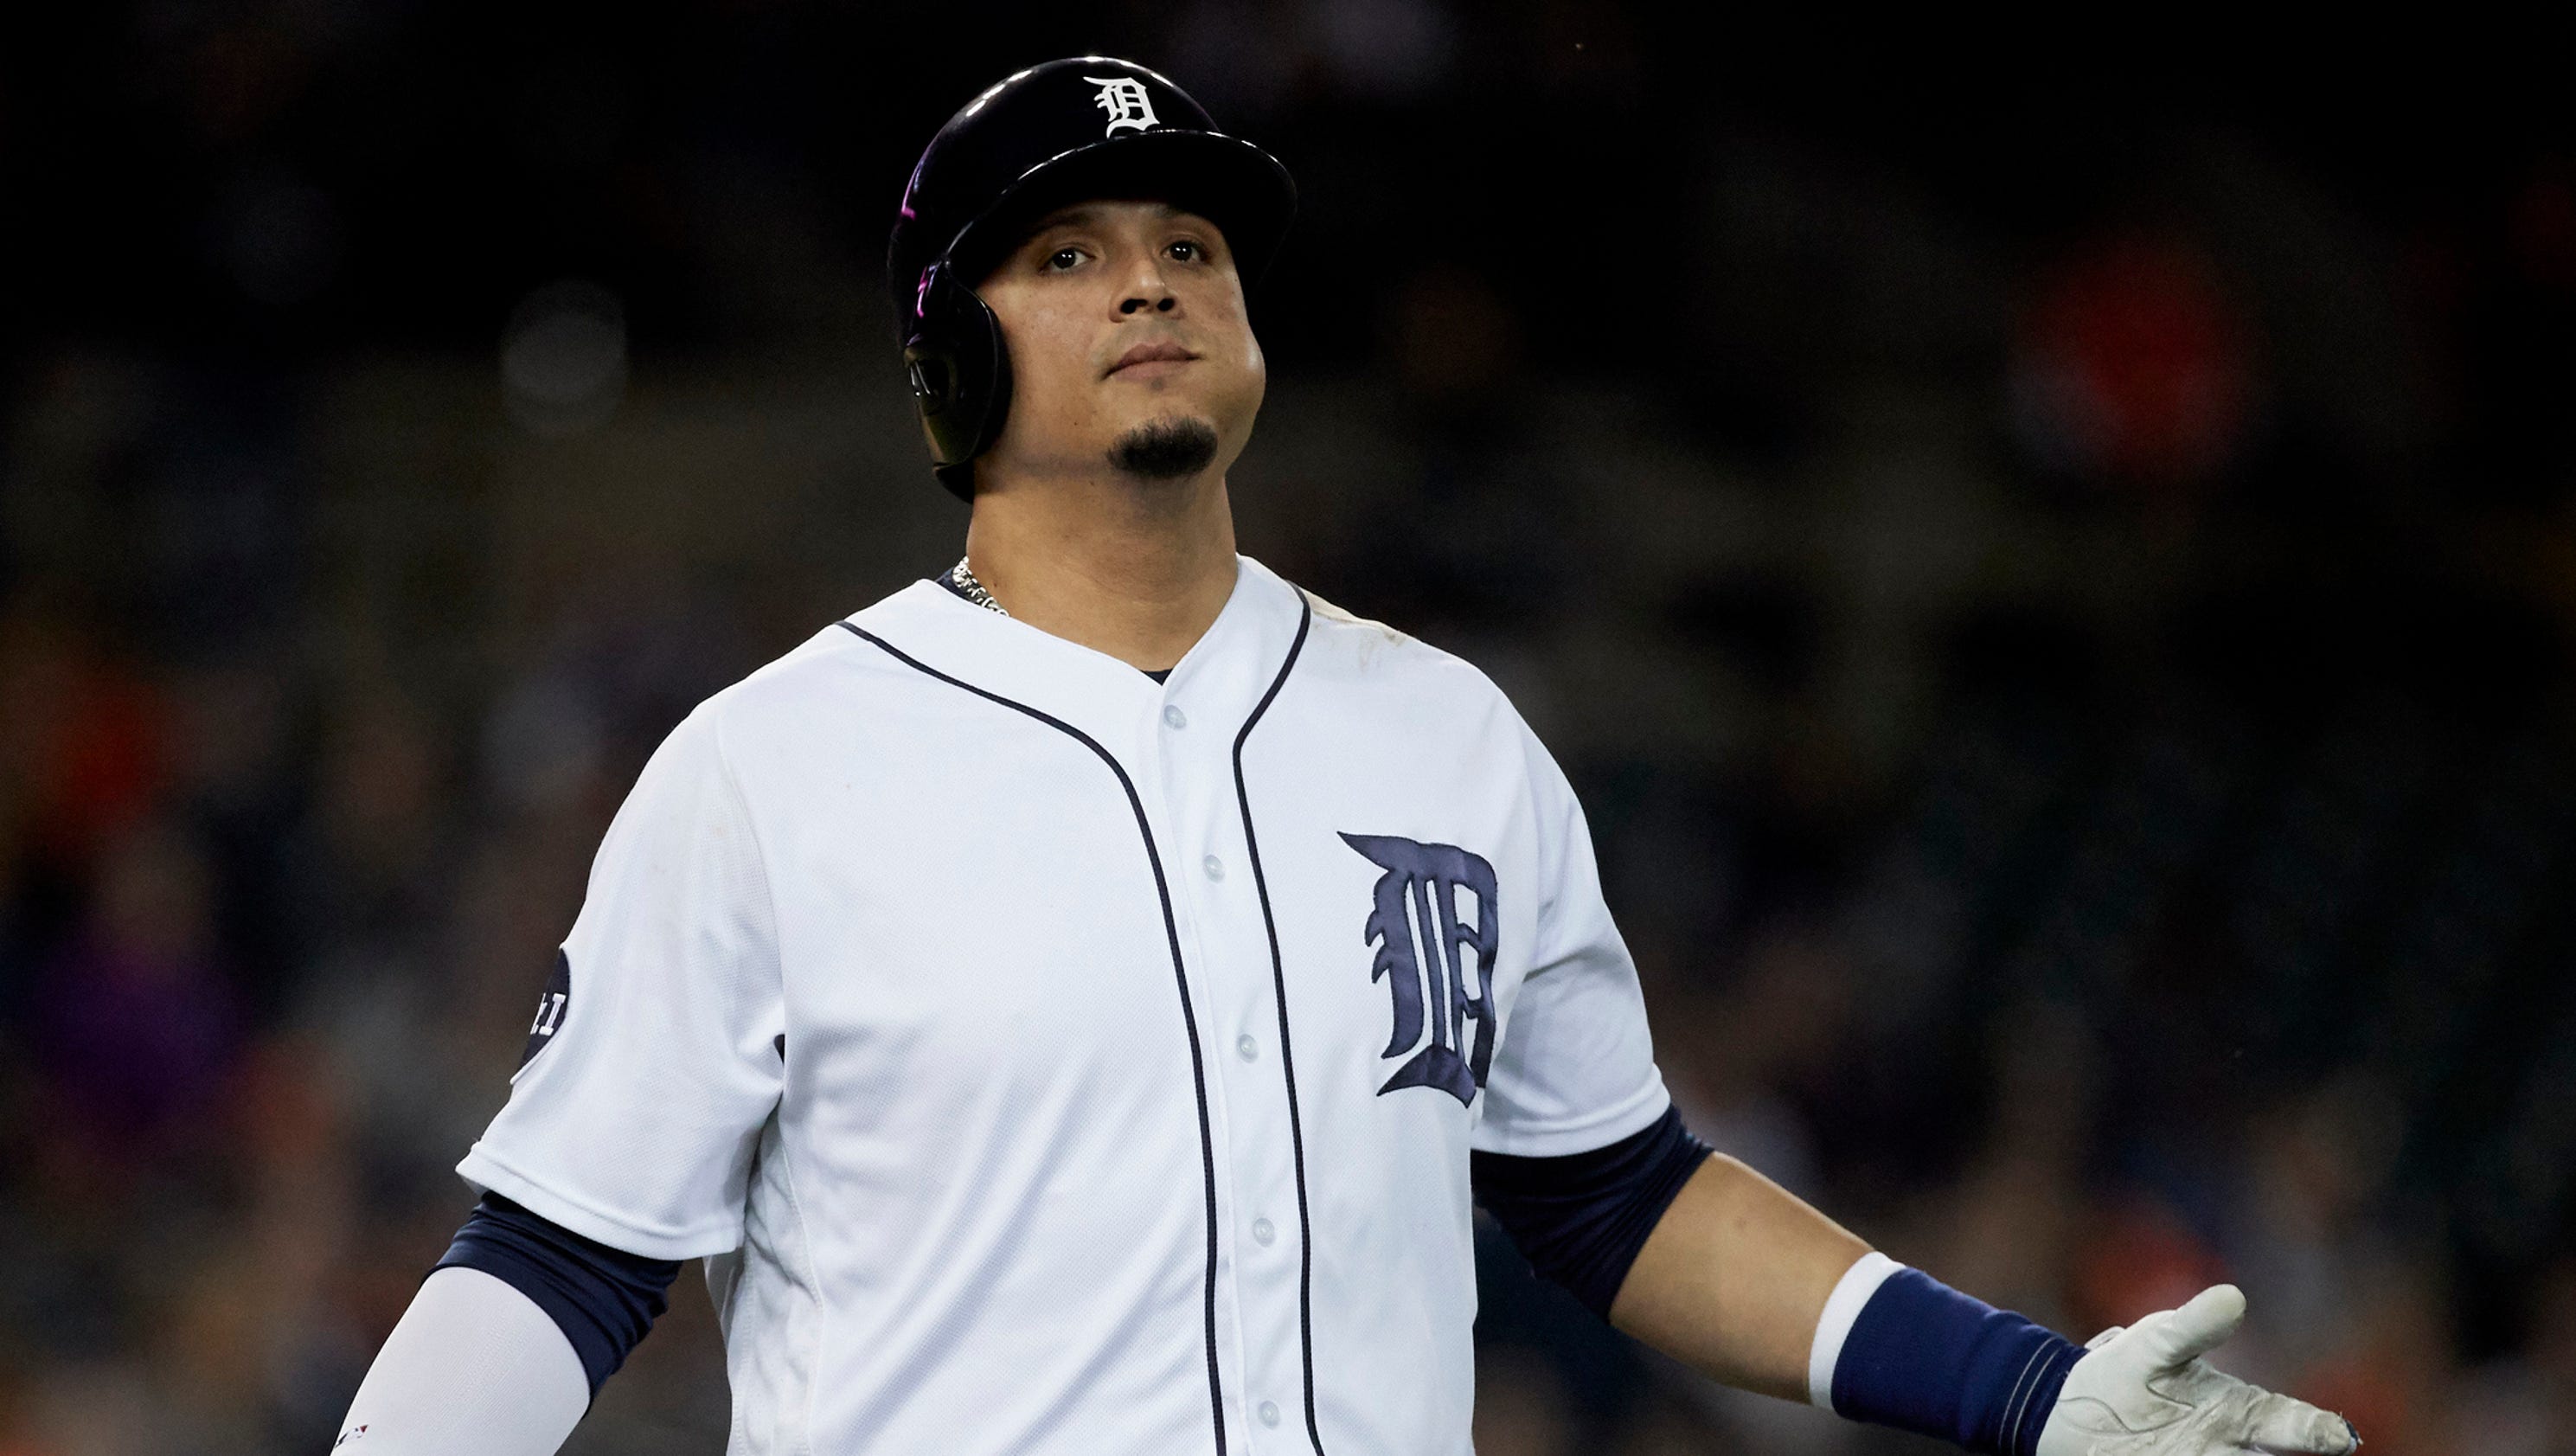 'I want to get out': Victor Martinez didn't feel right during Thursday's ... - Detroit Free Press